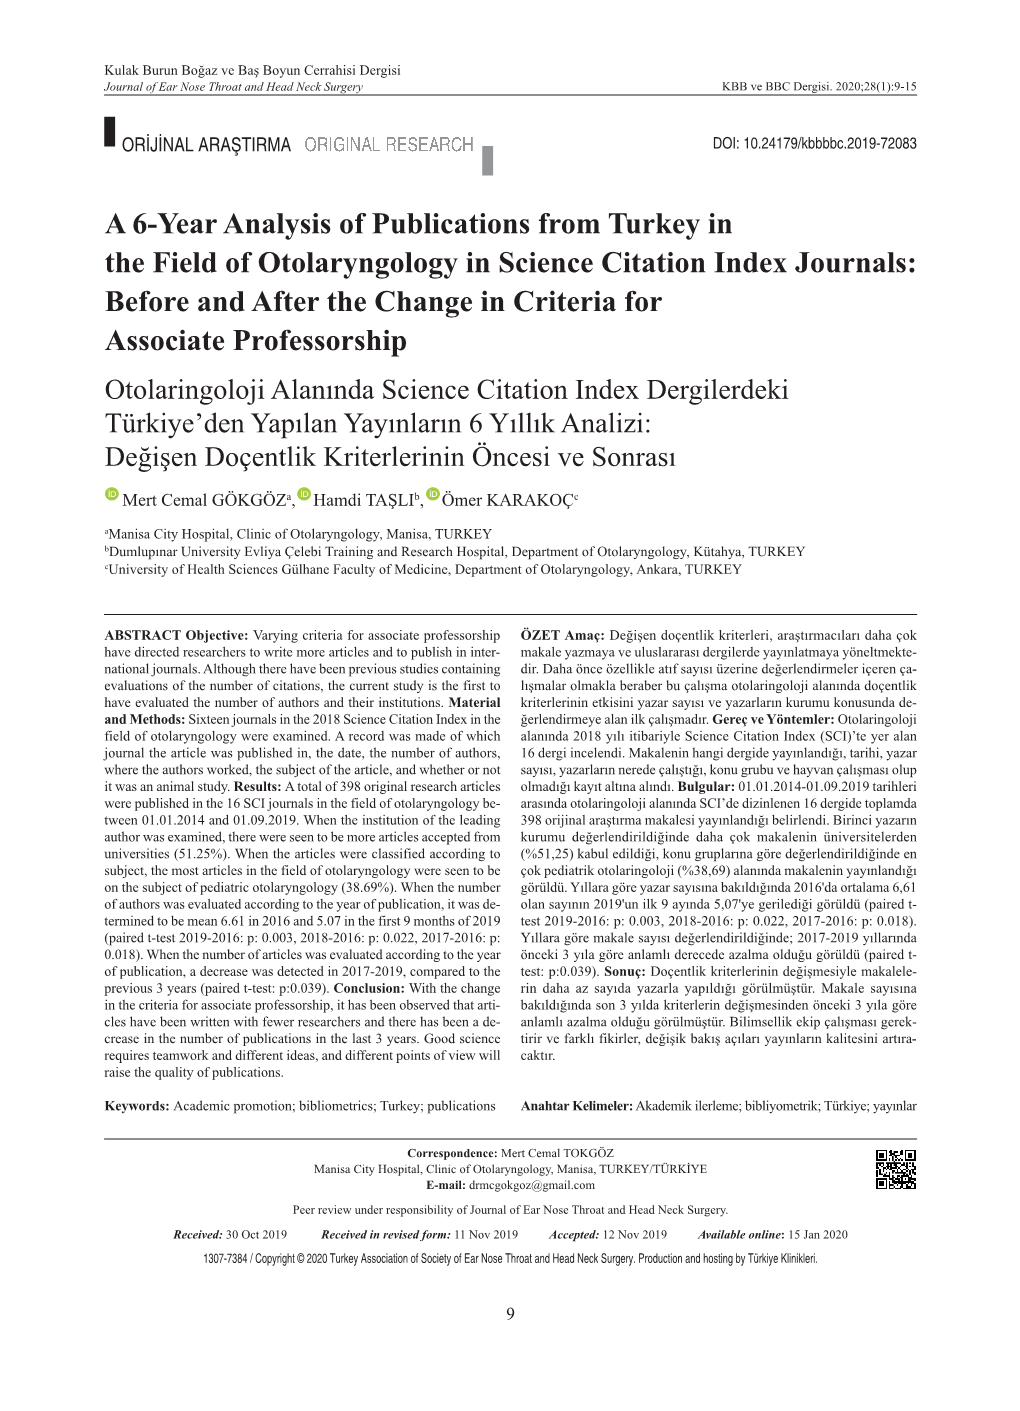 A 6-Year Analysis of Publications from Turkey in the Field of Otolaryngology in Science Citation Index Journals: Before and Af